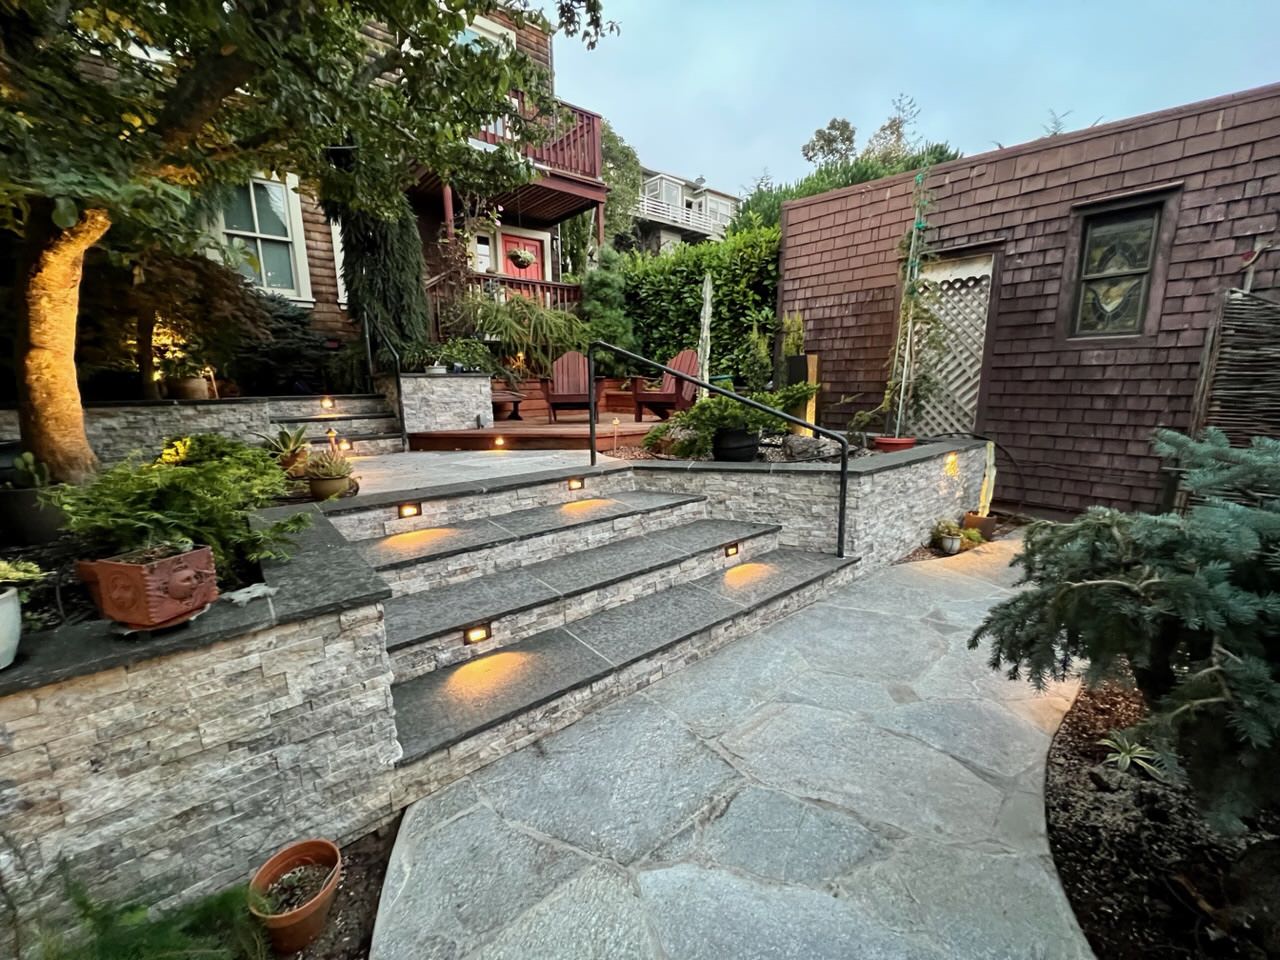 Completed black basalt stairs, quartzite flagstone walkway, retaining walls faced with silver travertine, and redwood deck.